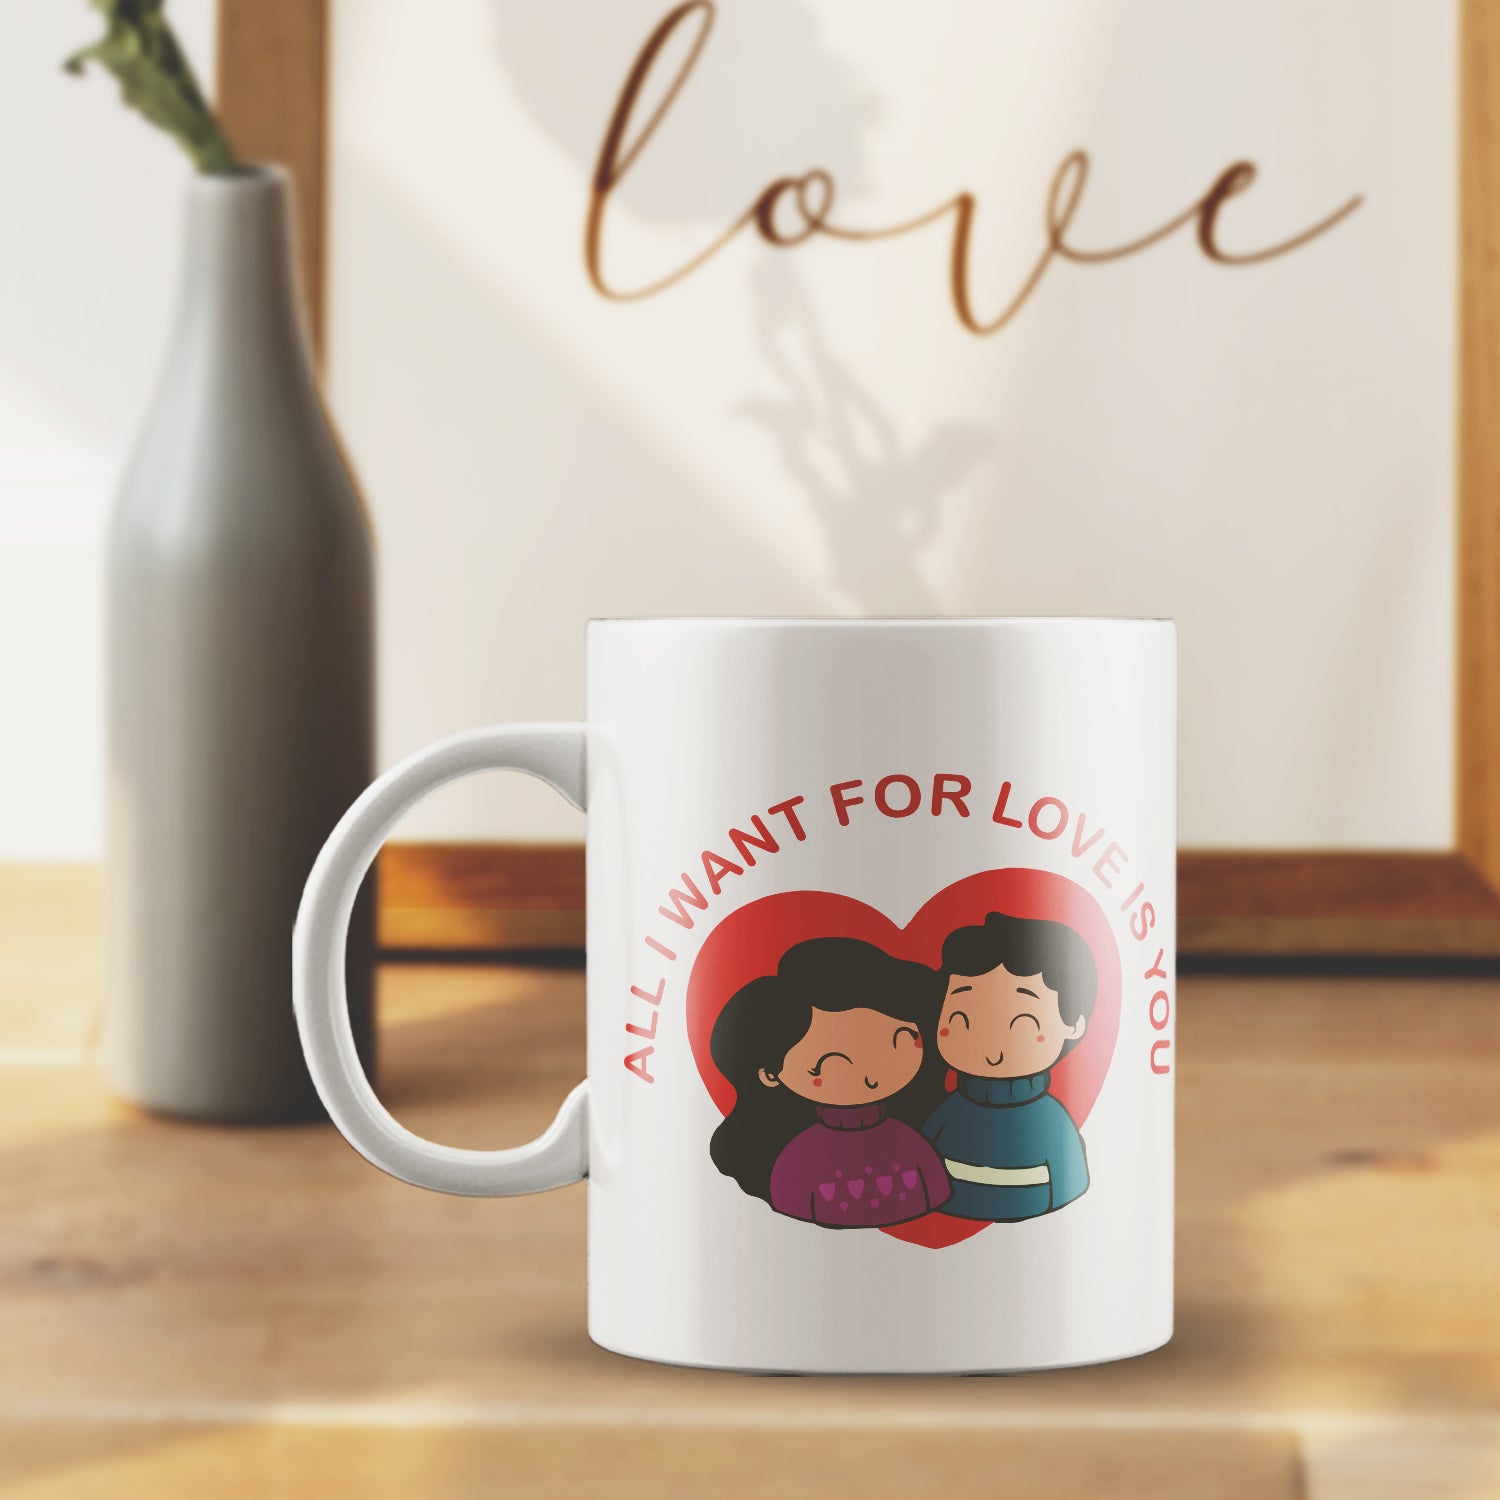 "All I want for Love is you" Valentine Love theme Ceramic Coffee Mug 1